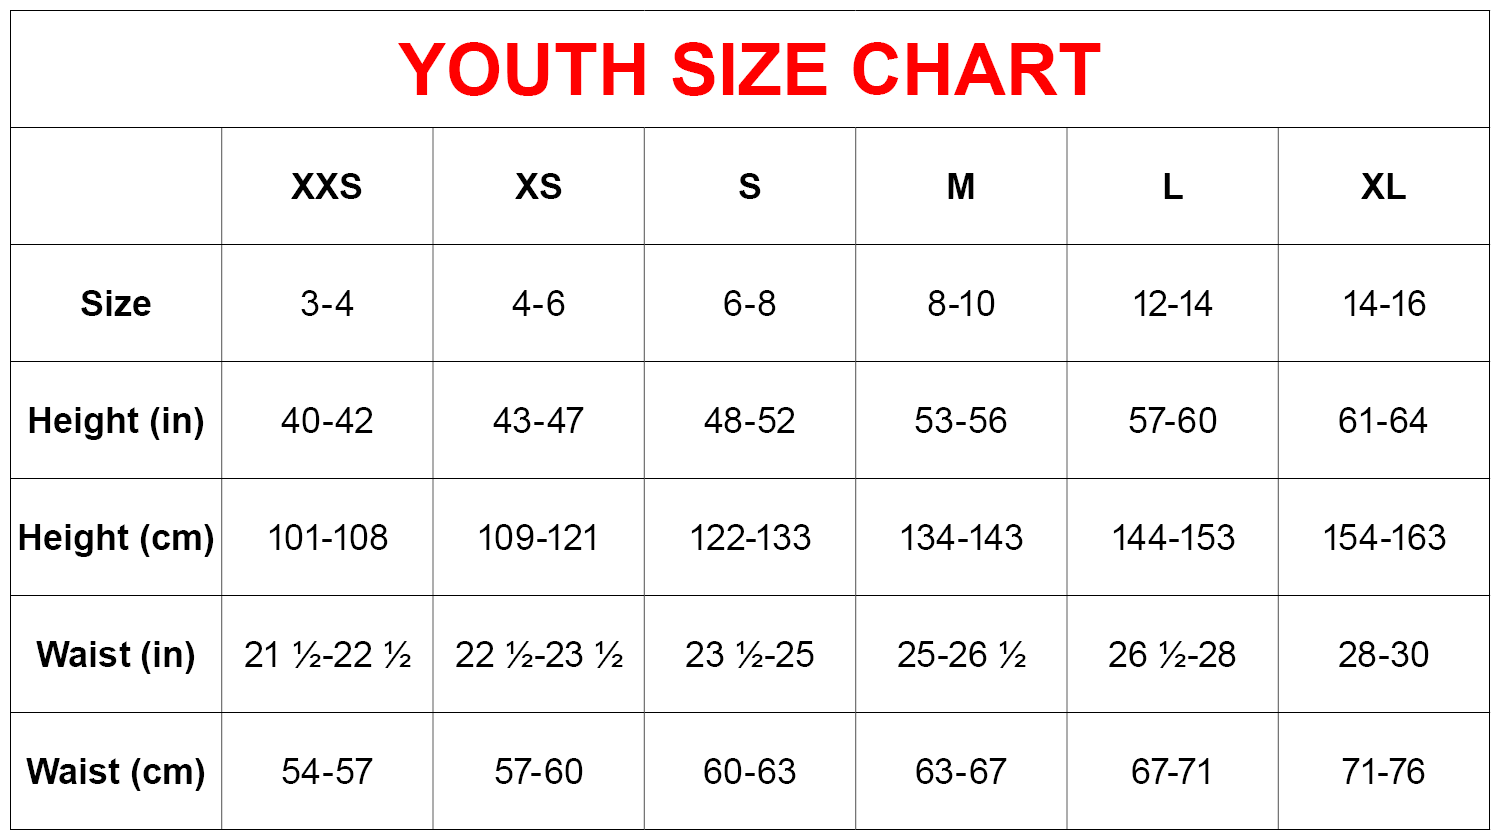 Hot Chillys Youth Size Chart